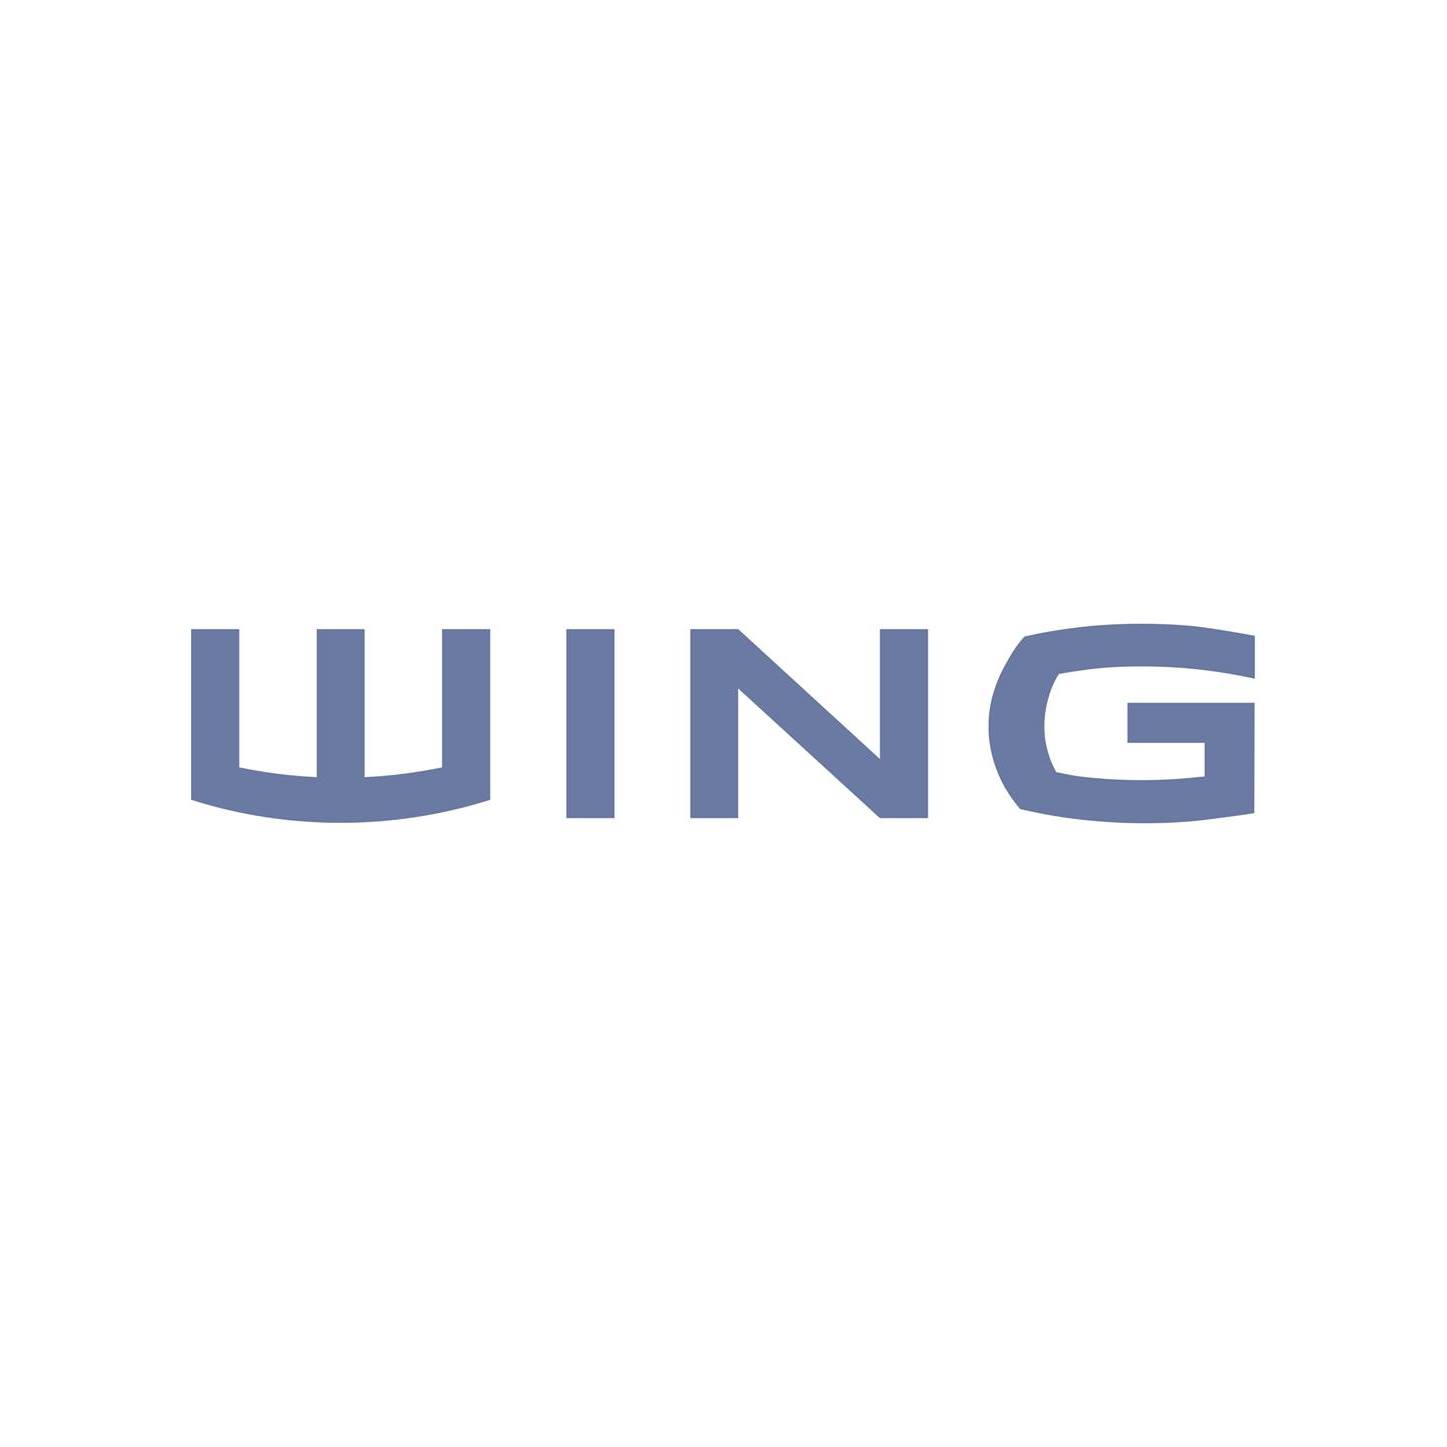 Successful bond issue by WING